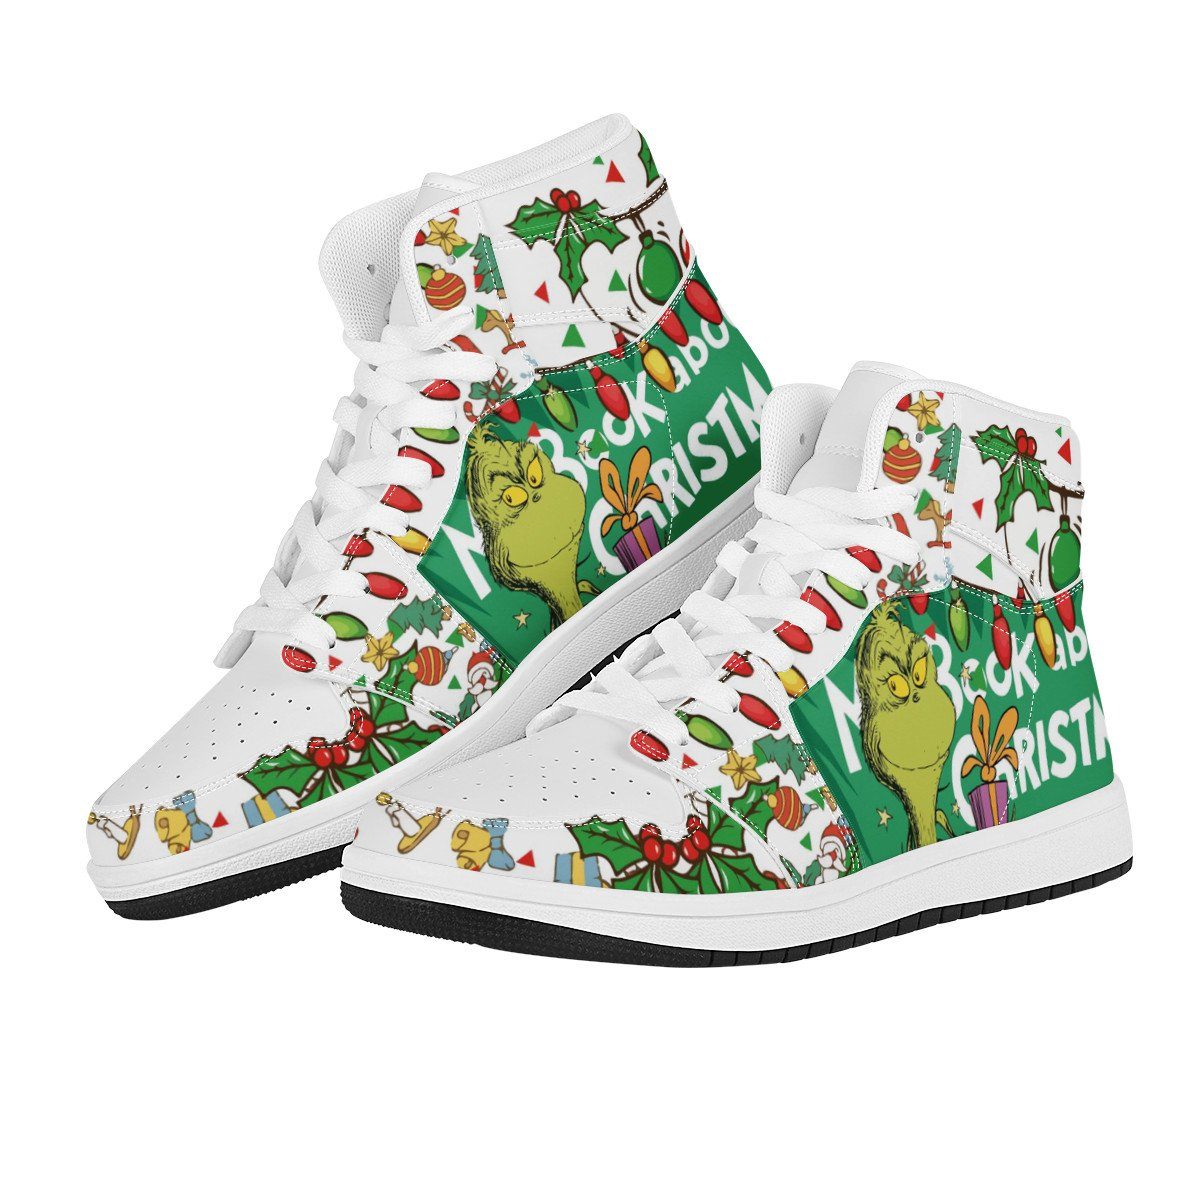 How the Grinch Stole Christmas High Top Sneaker - White | NOXFAN - noxfan